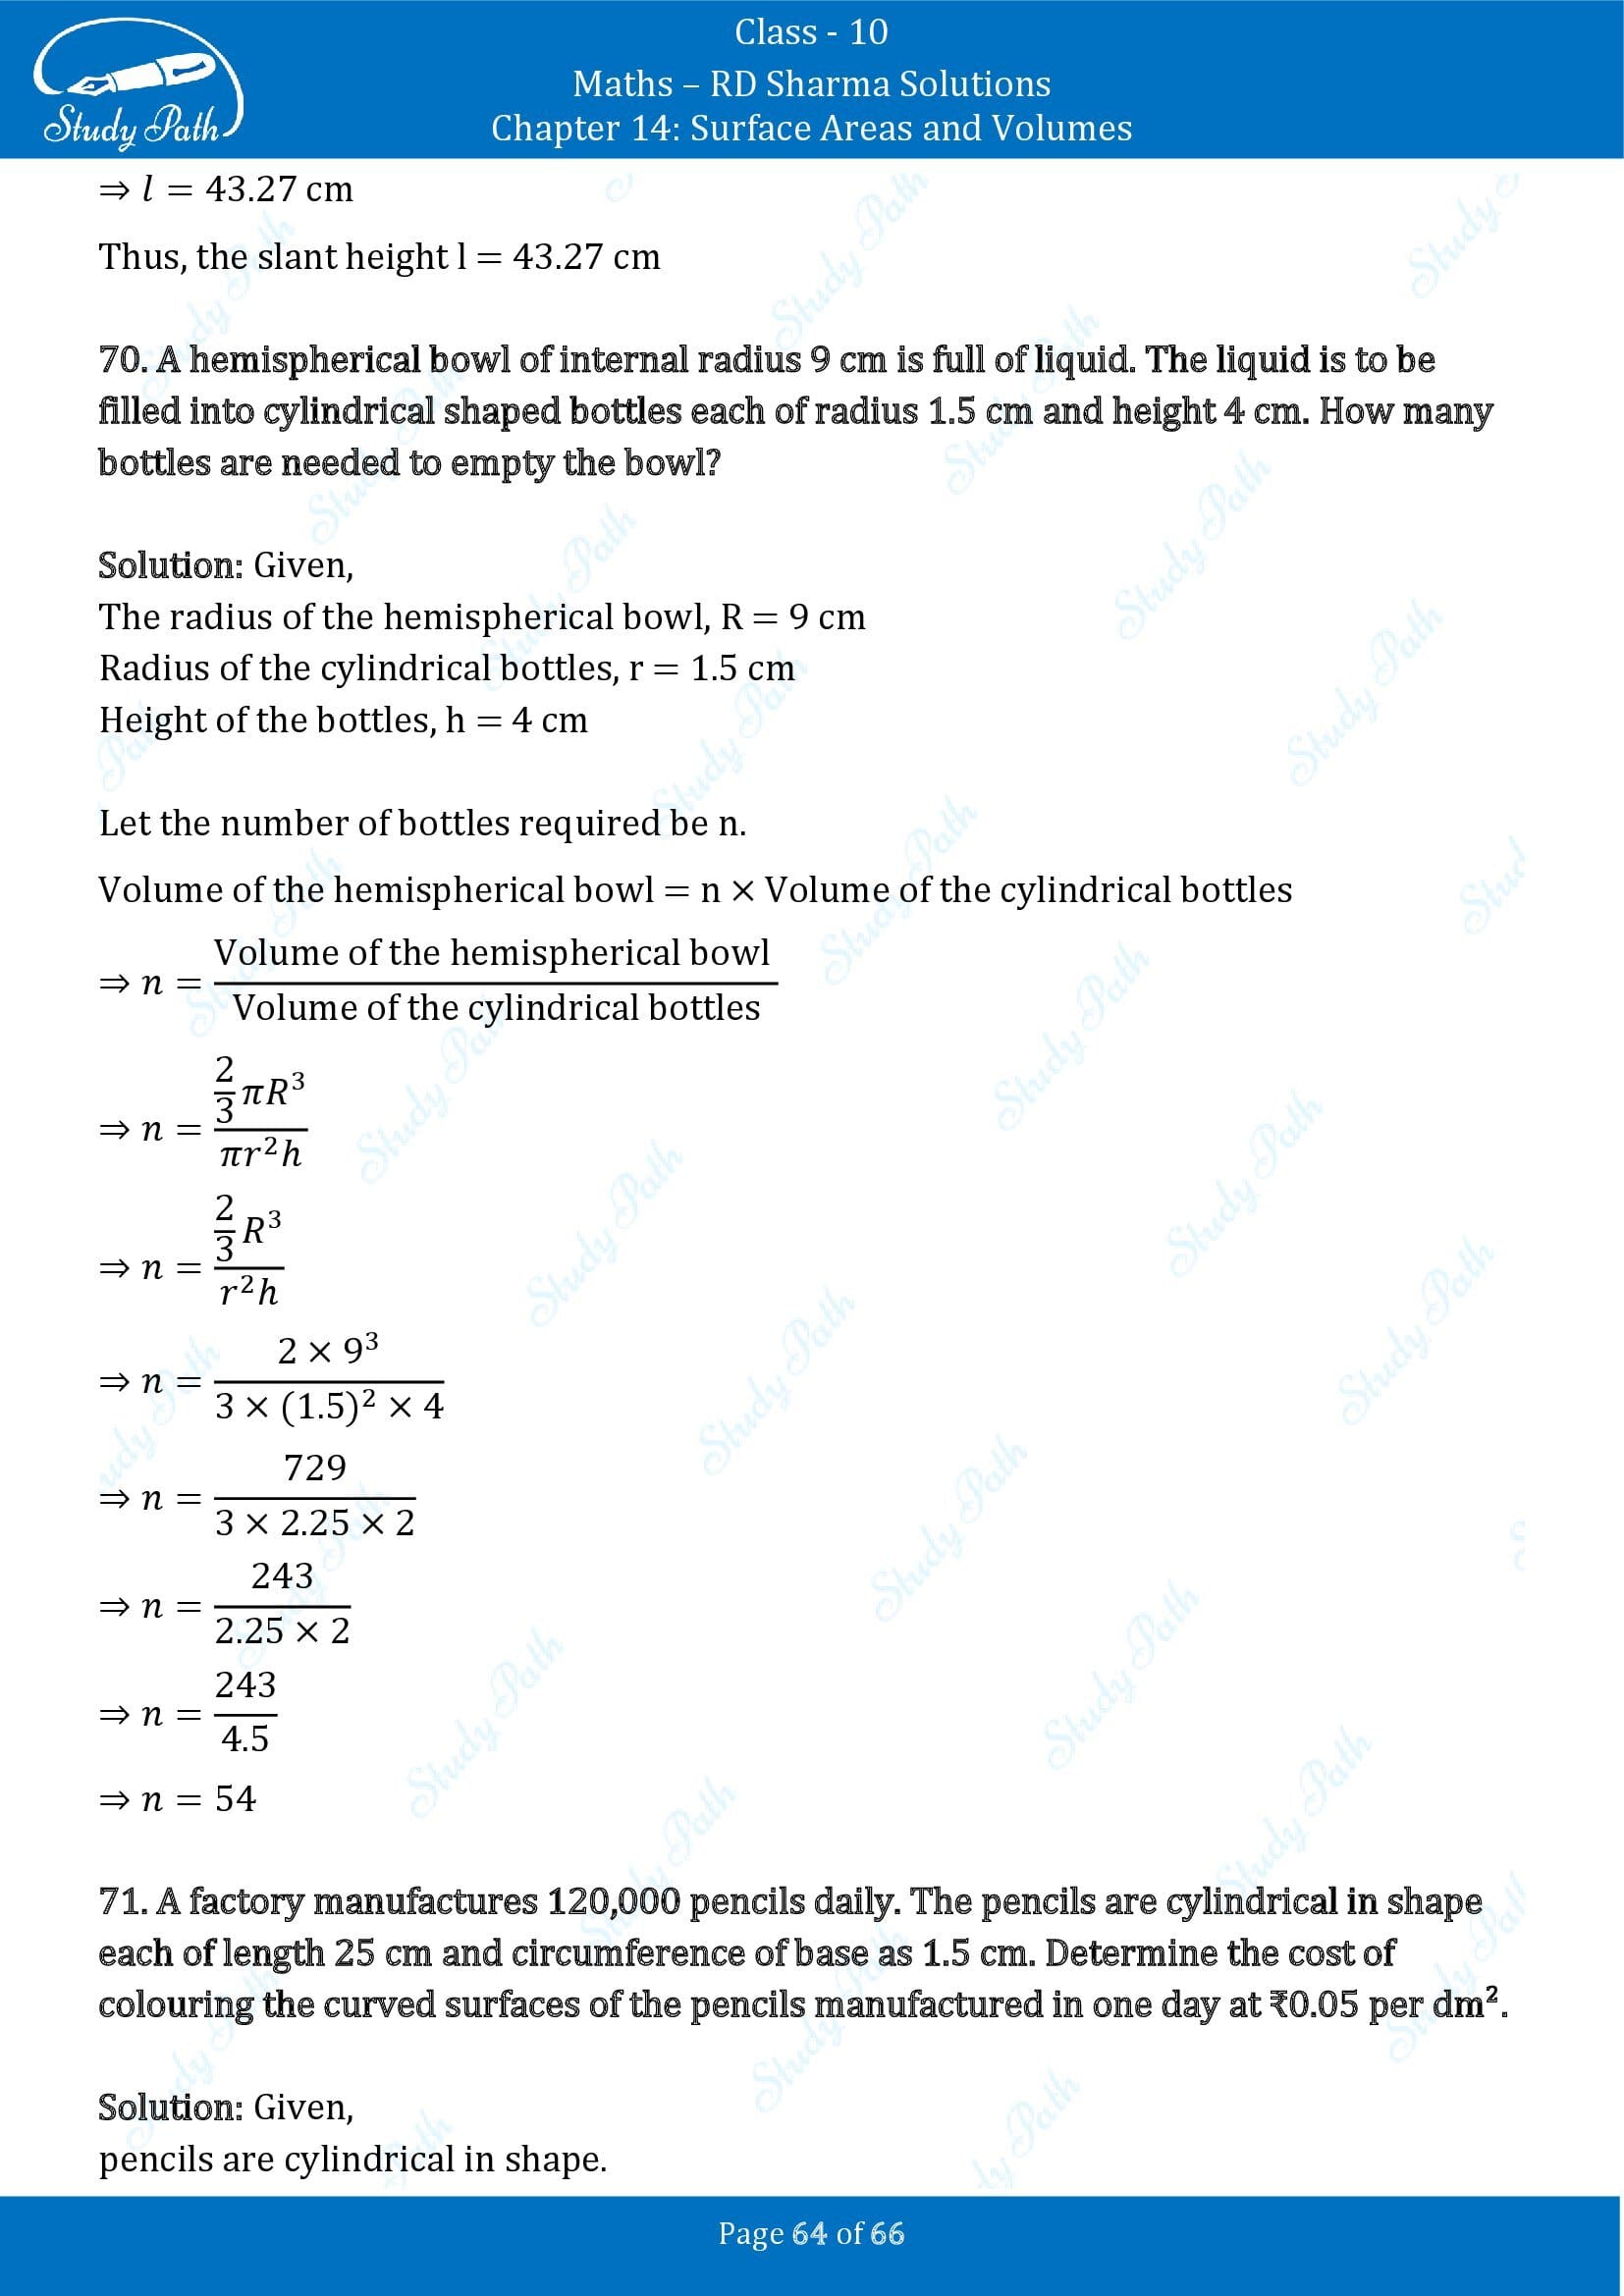 RD Sharma Solutions Class 10 Chapter 14 Surface Areas and Volumes Exercise 14.1 00064